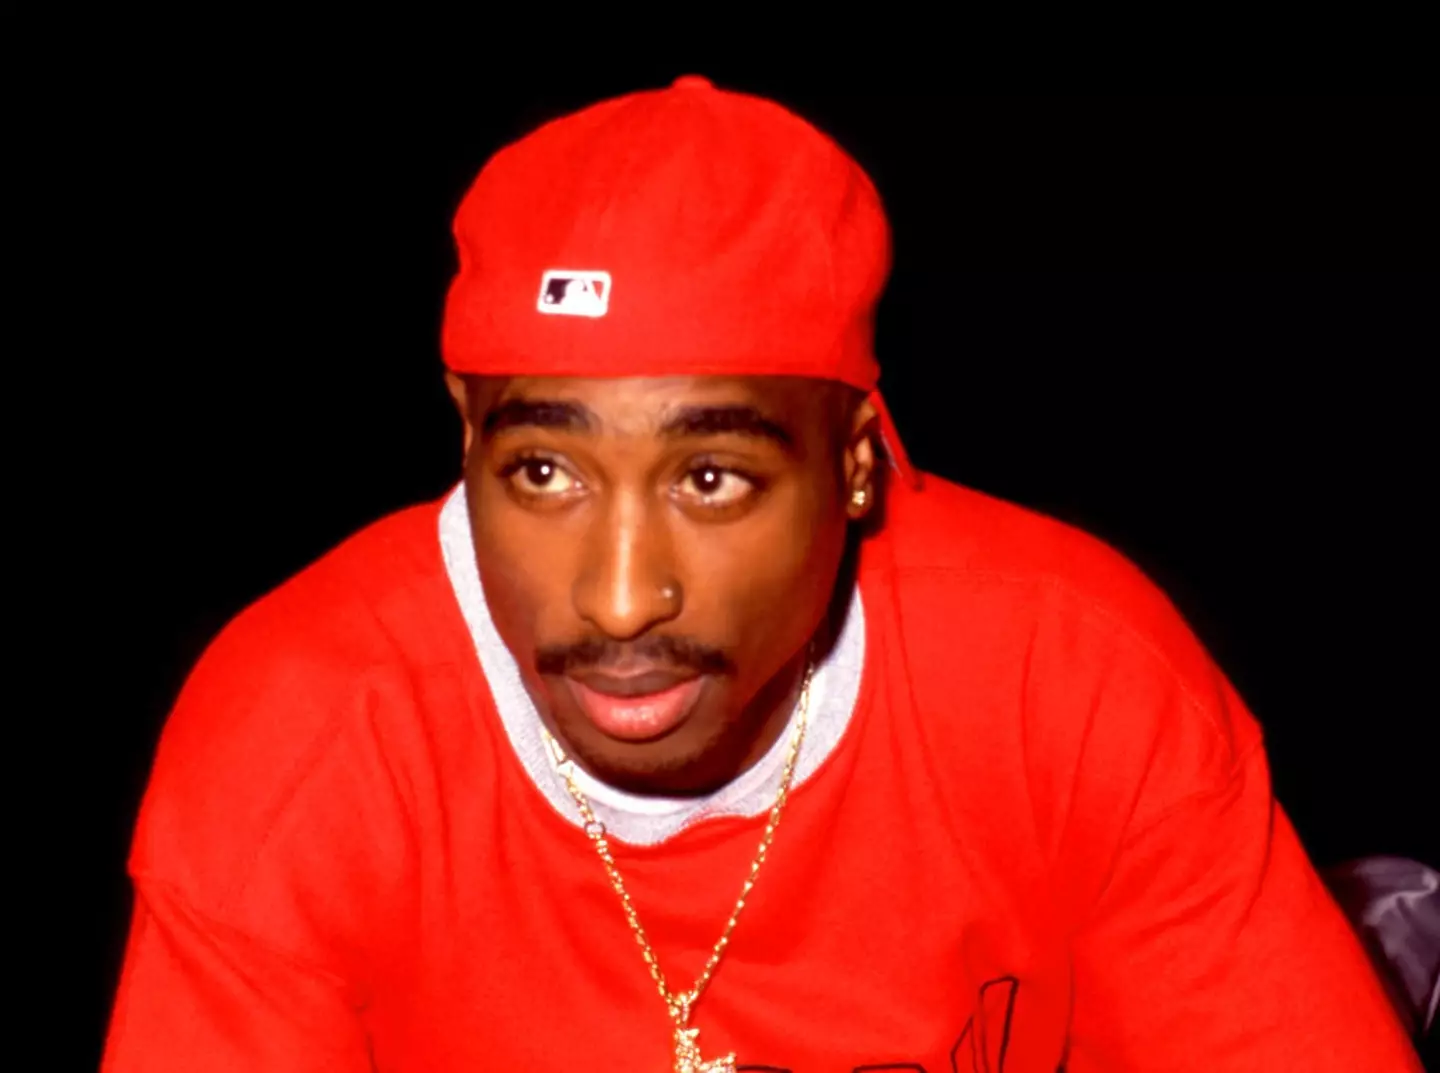 Tupac was shot to death in 1996, although the case of his murder is yet to be solved.